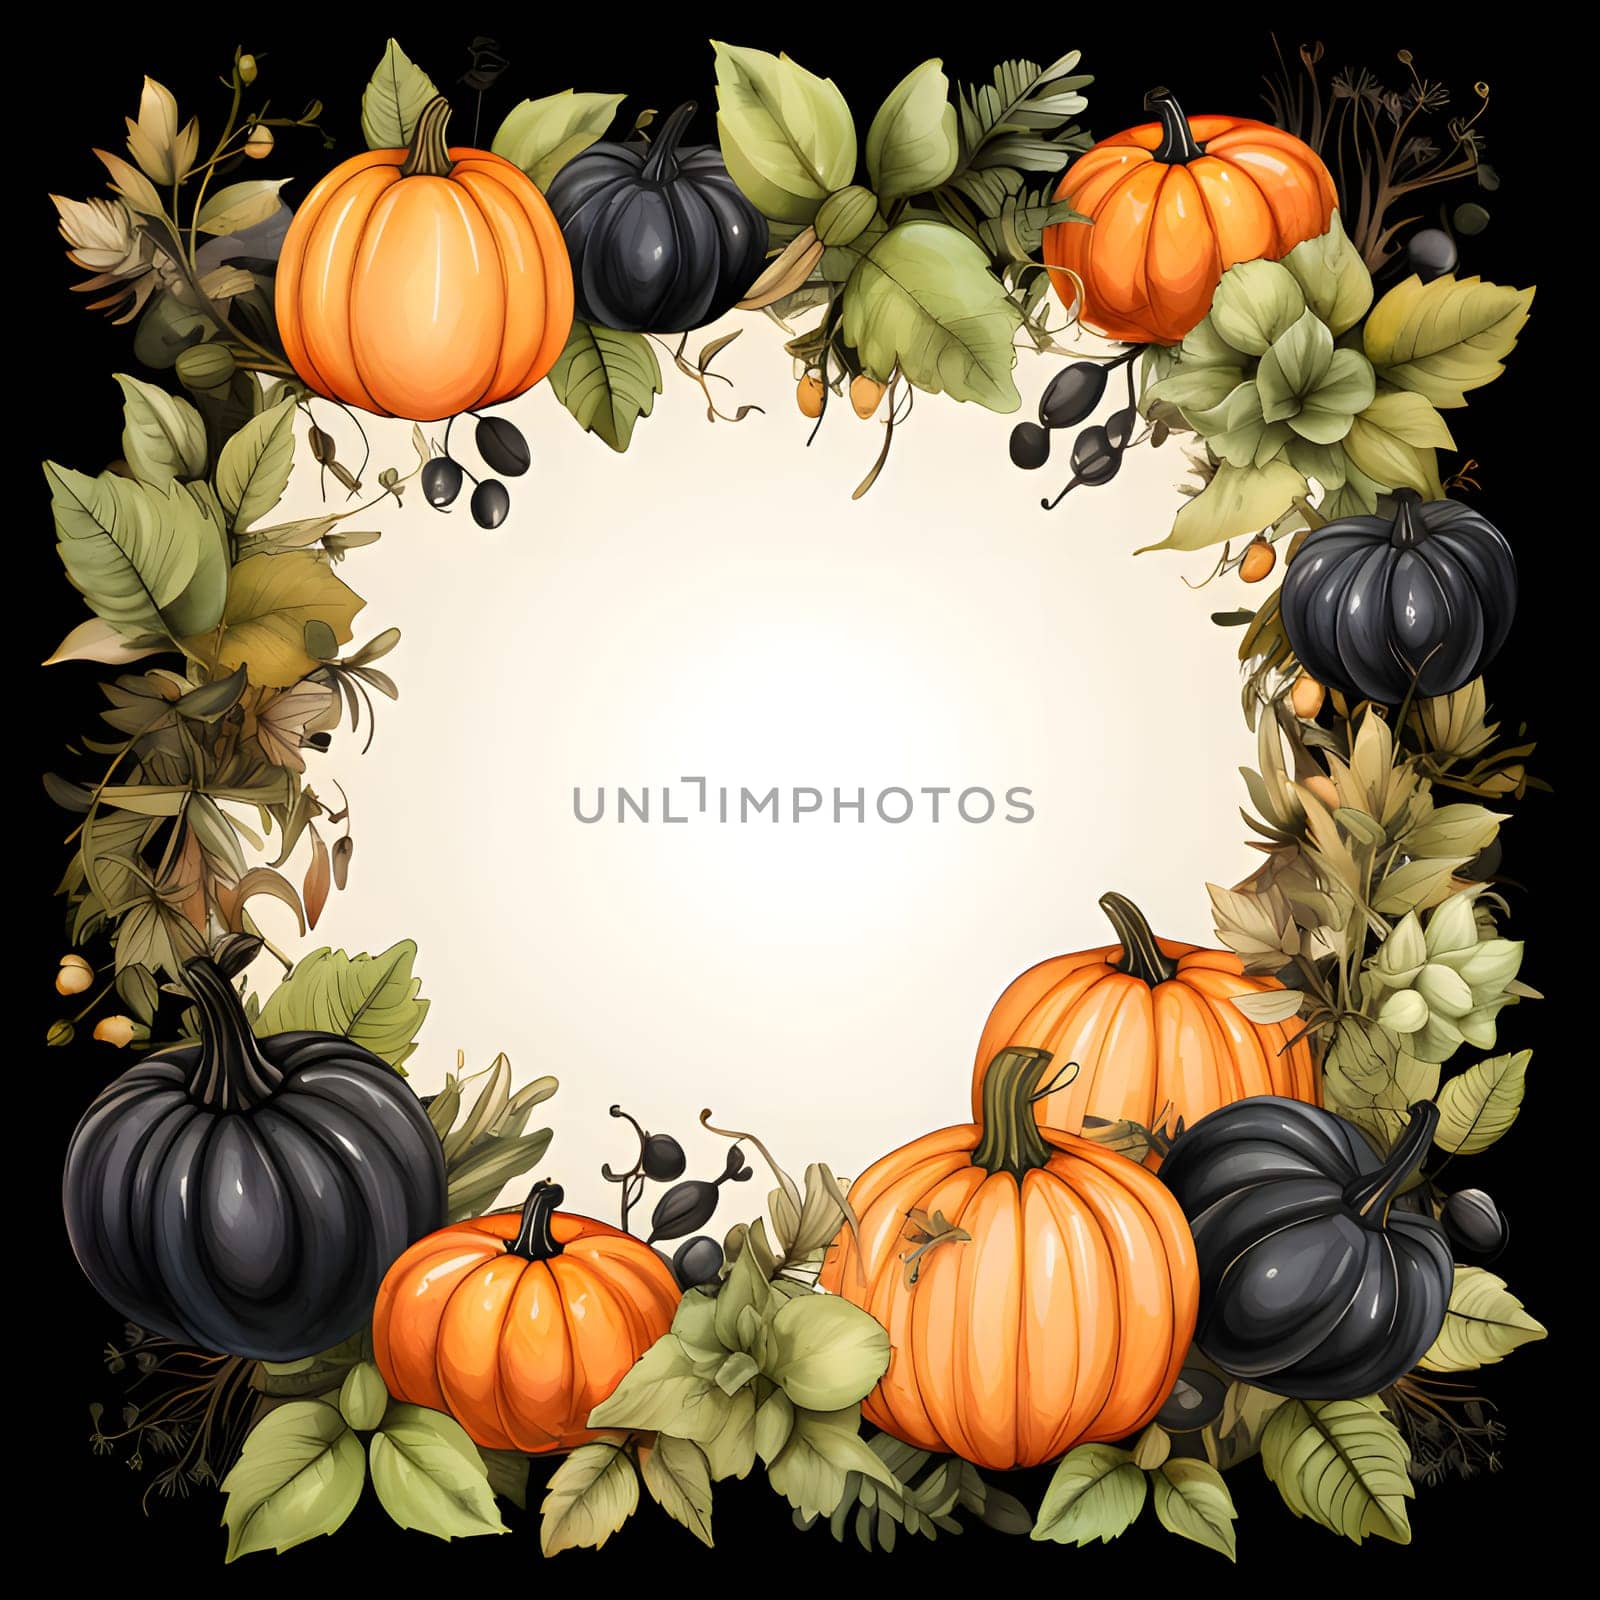 A frame embellished with pumpkins and leaves against a light background forms an elegant and visually appealing composition.